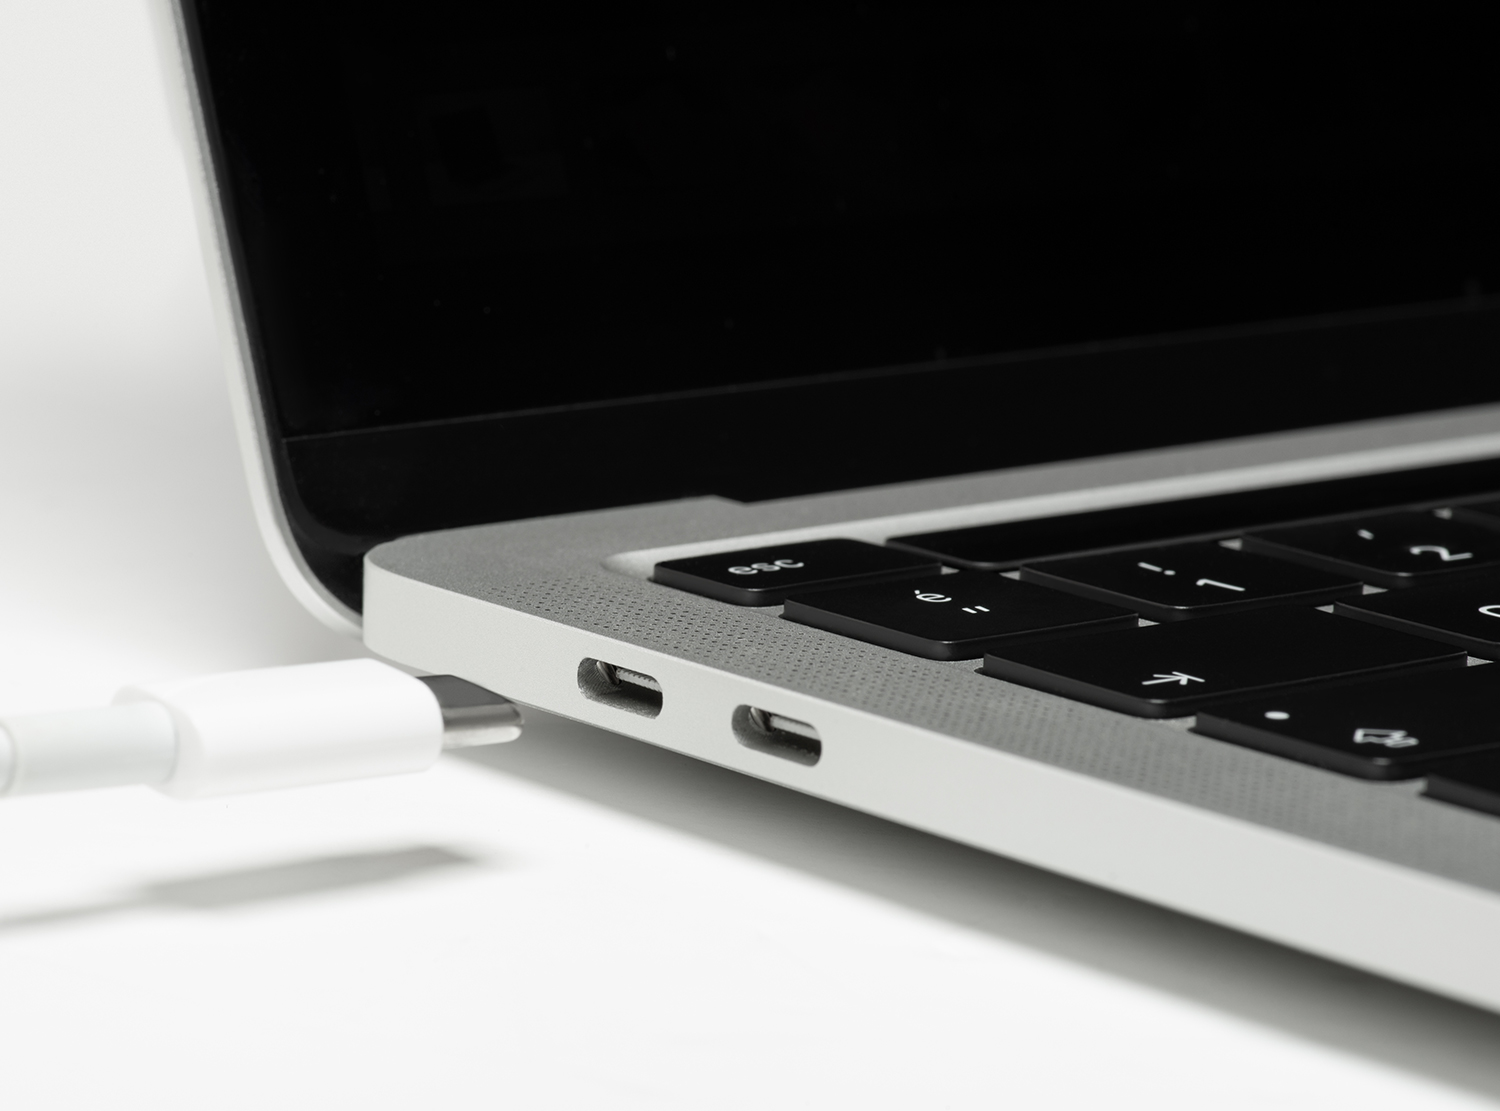 Many peripherals are accessible via USB-C or USB-A ports.